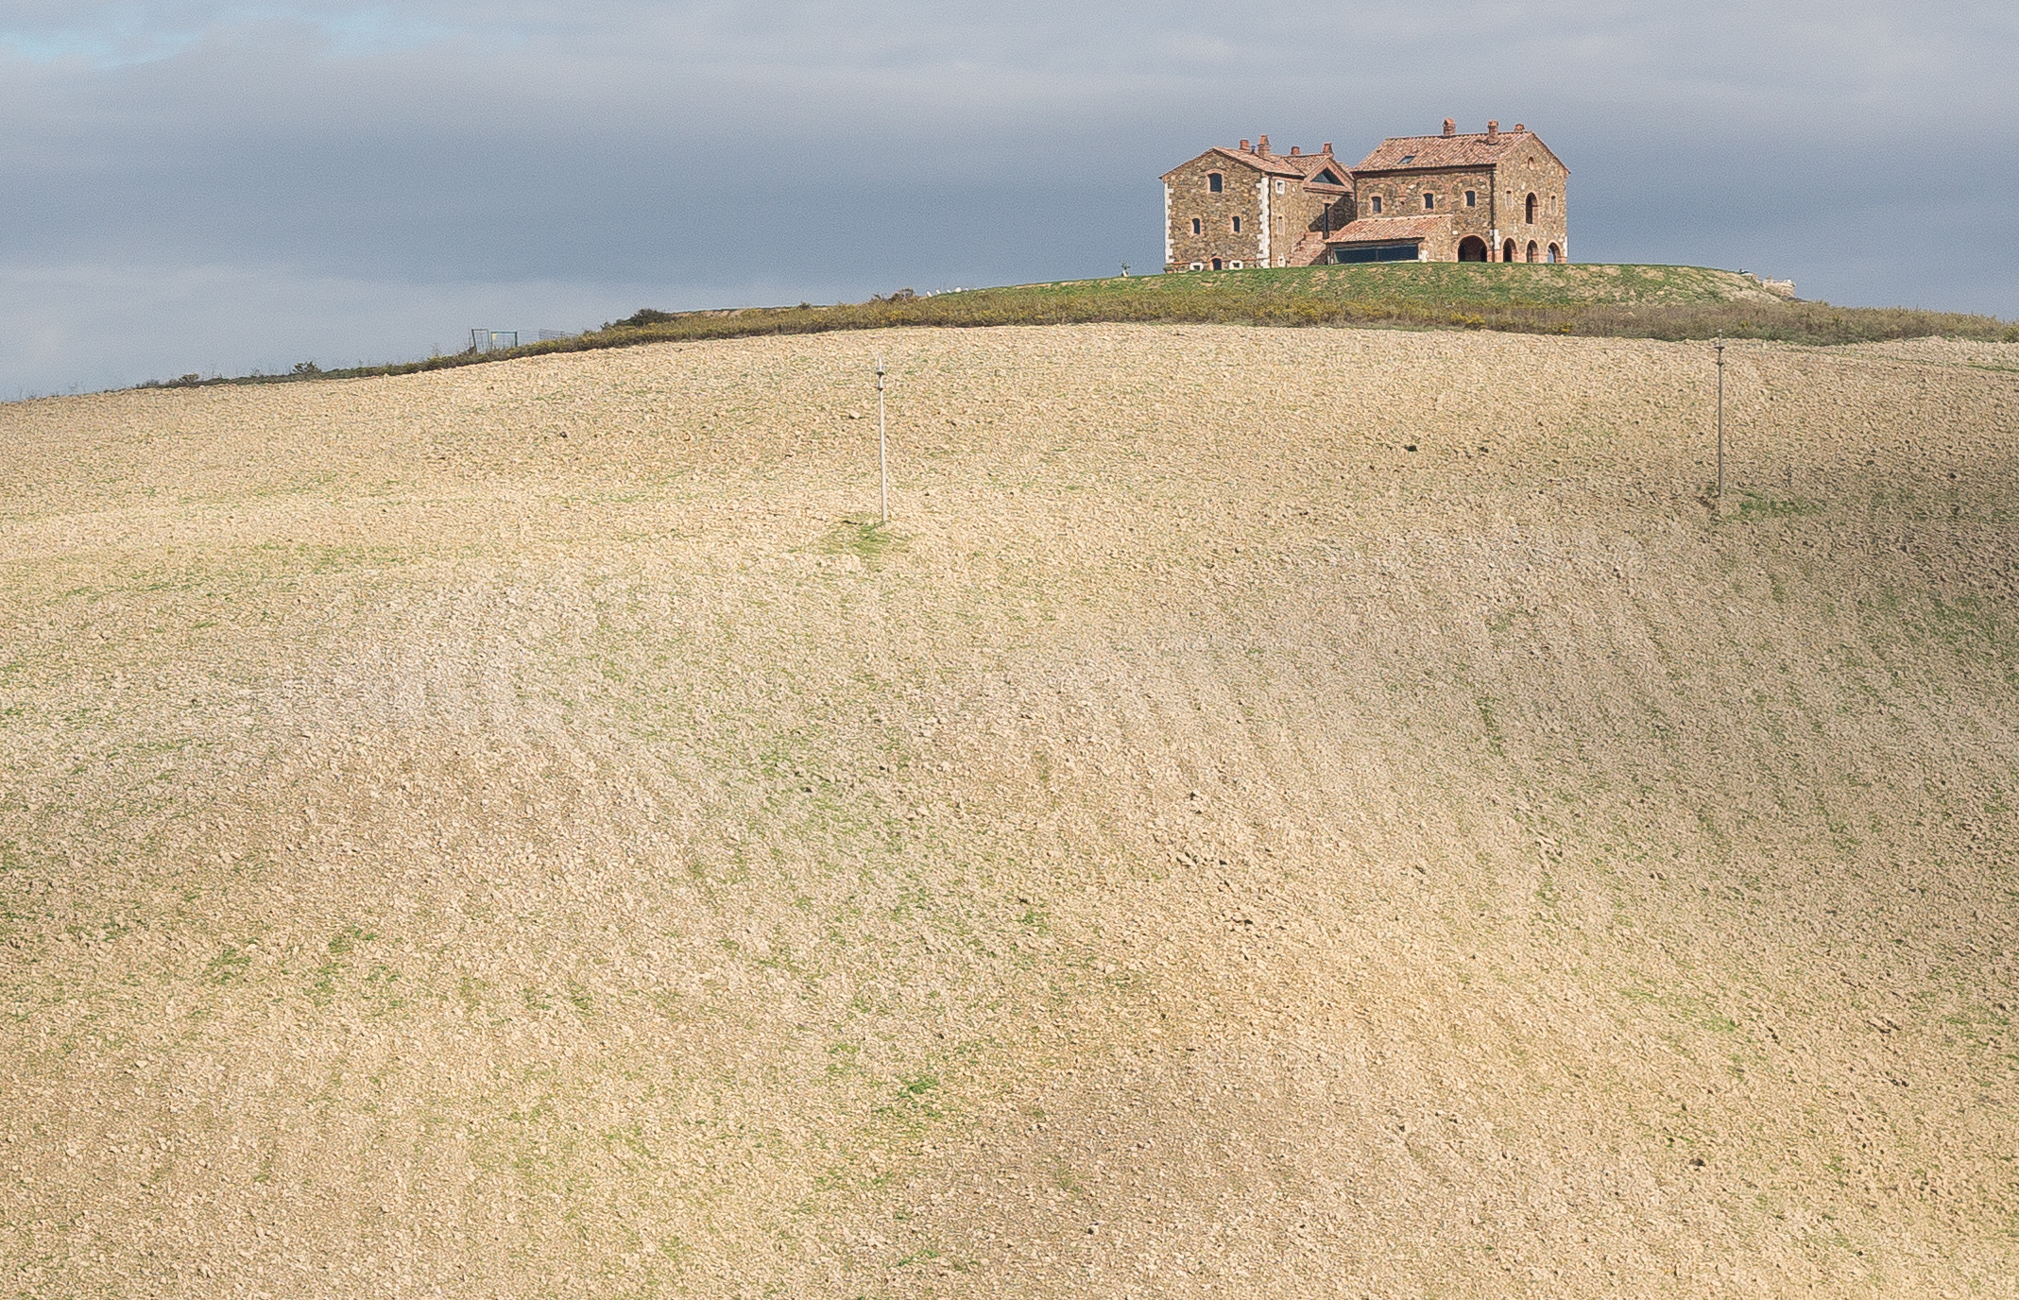 A farmhouse with cleared vineyard along the Via Francigena in Tuscana north of San Quirico d'Orcia, Italy | Photo by Mike Hudak